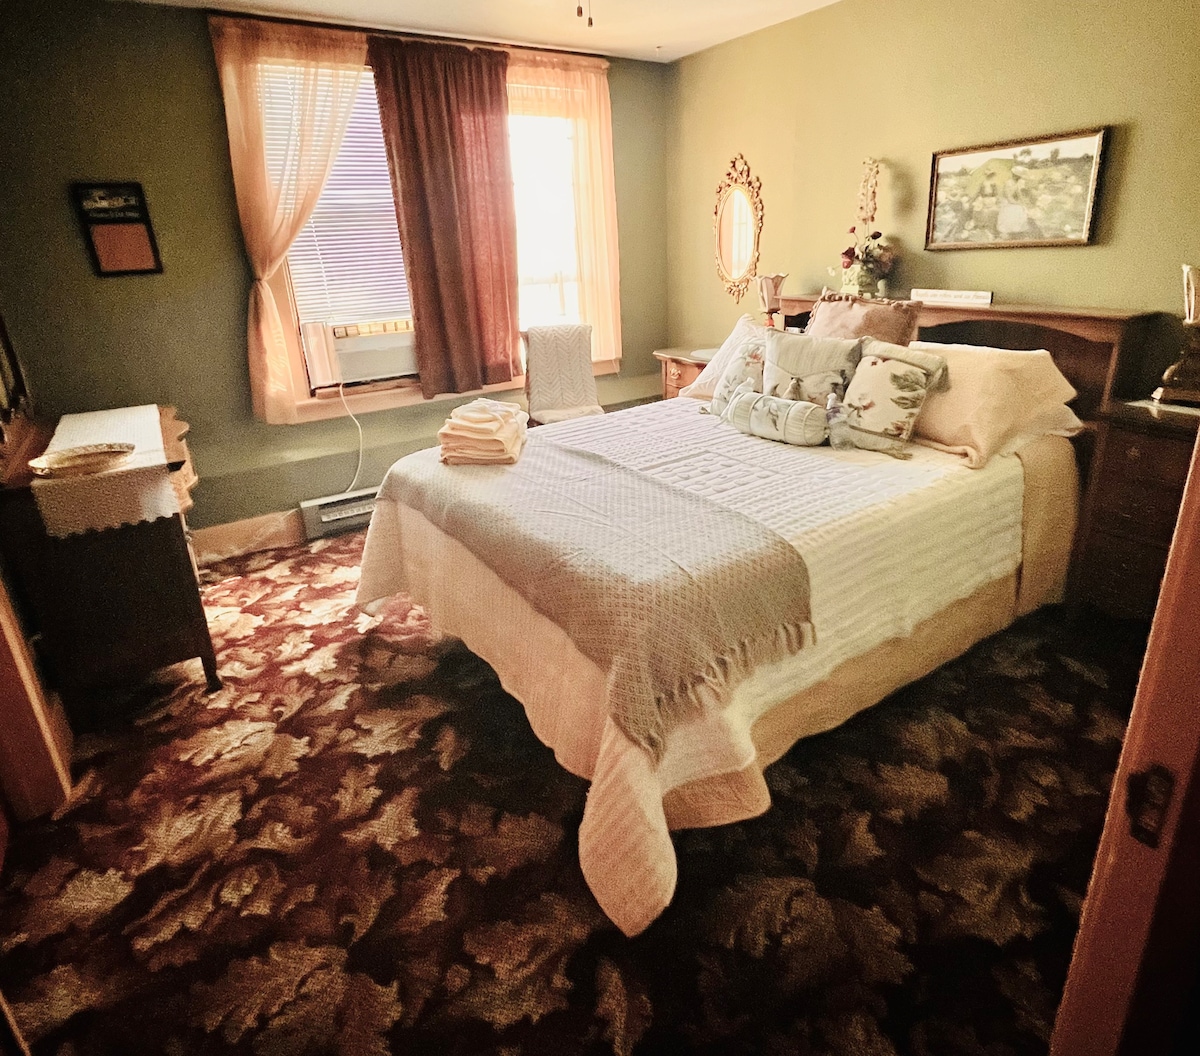 Room to relax in historic 1920’s home